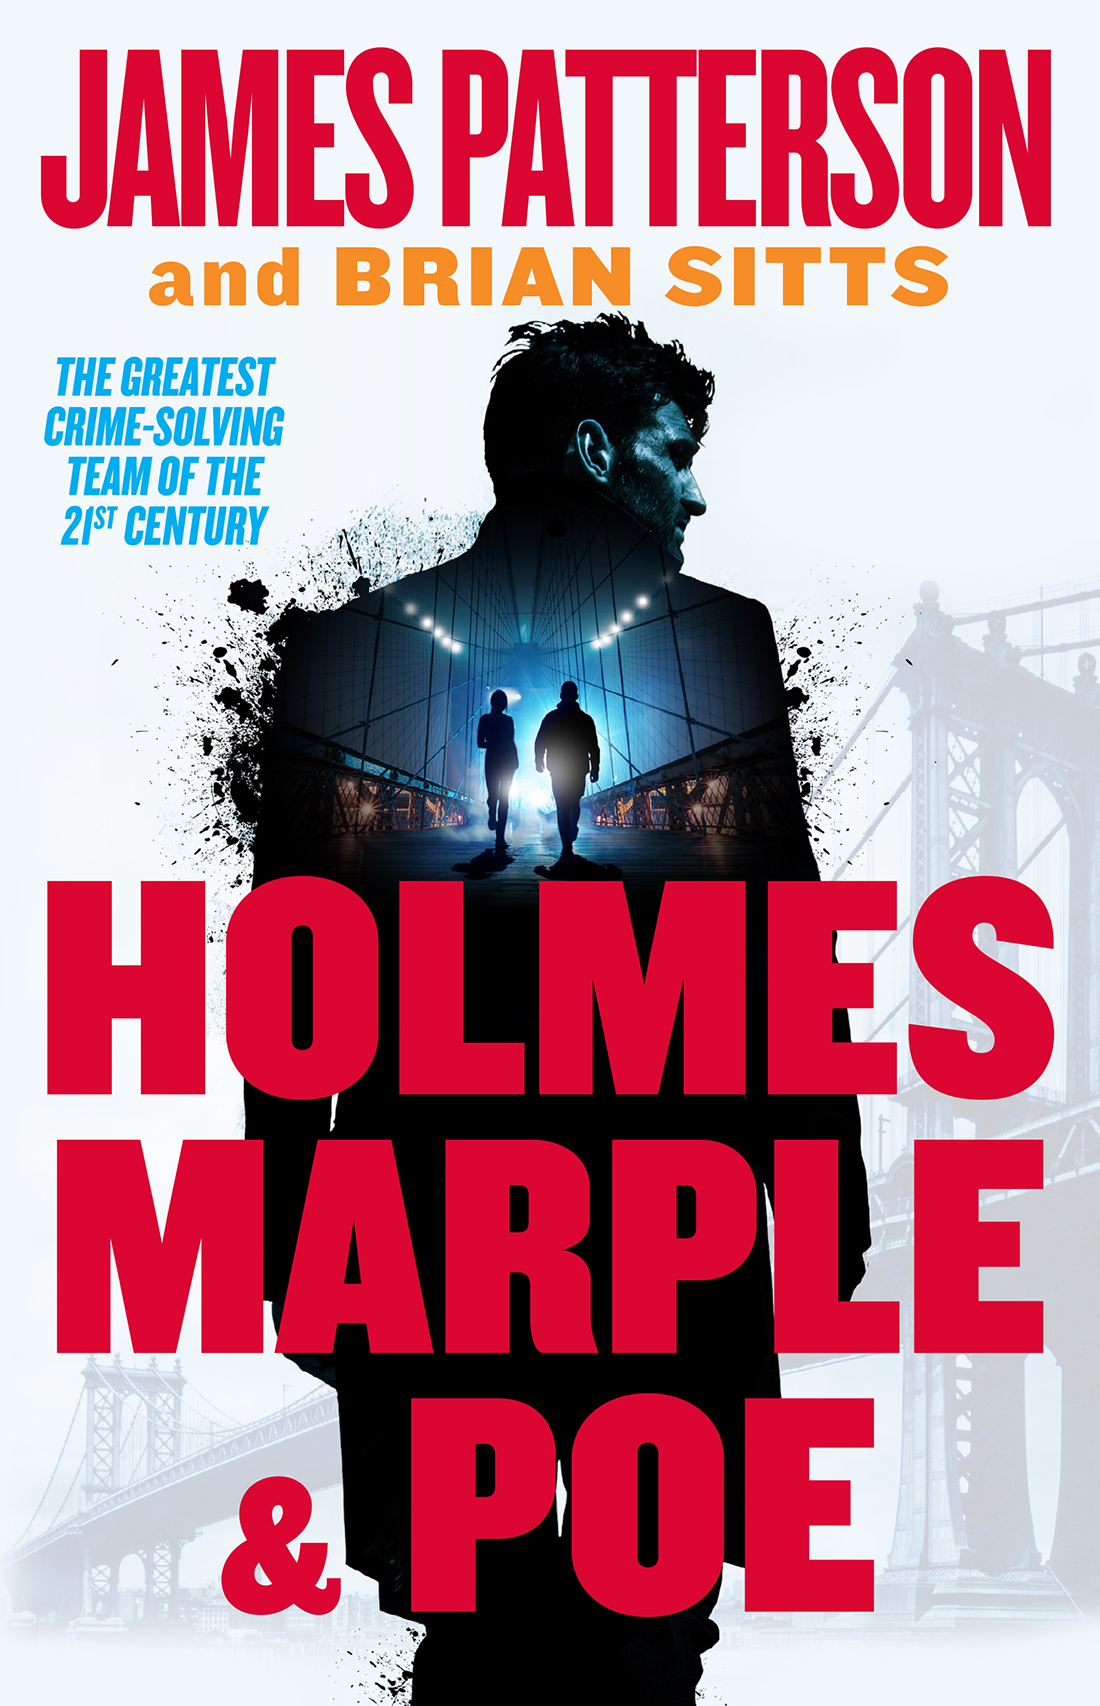 Image for "Holmes, Marple and Poe"